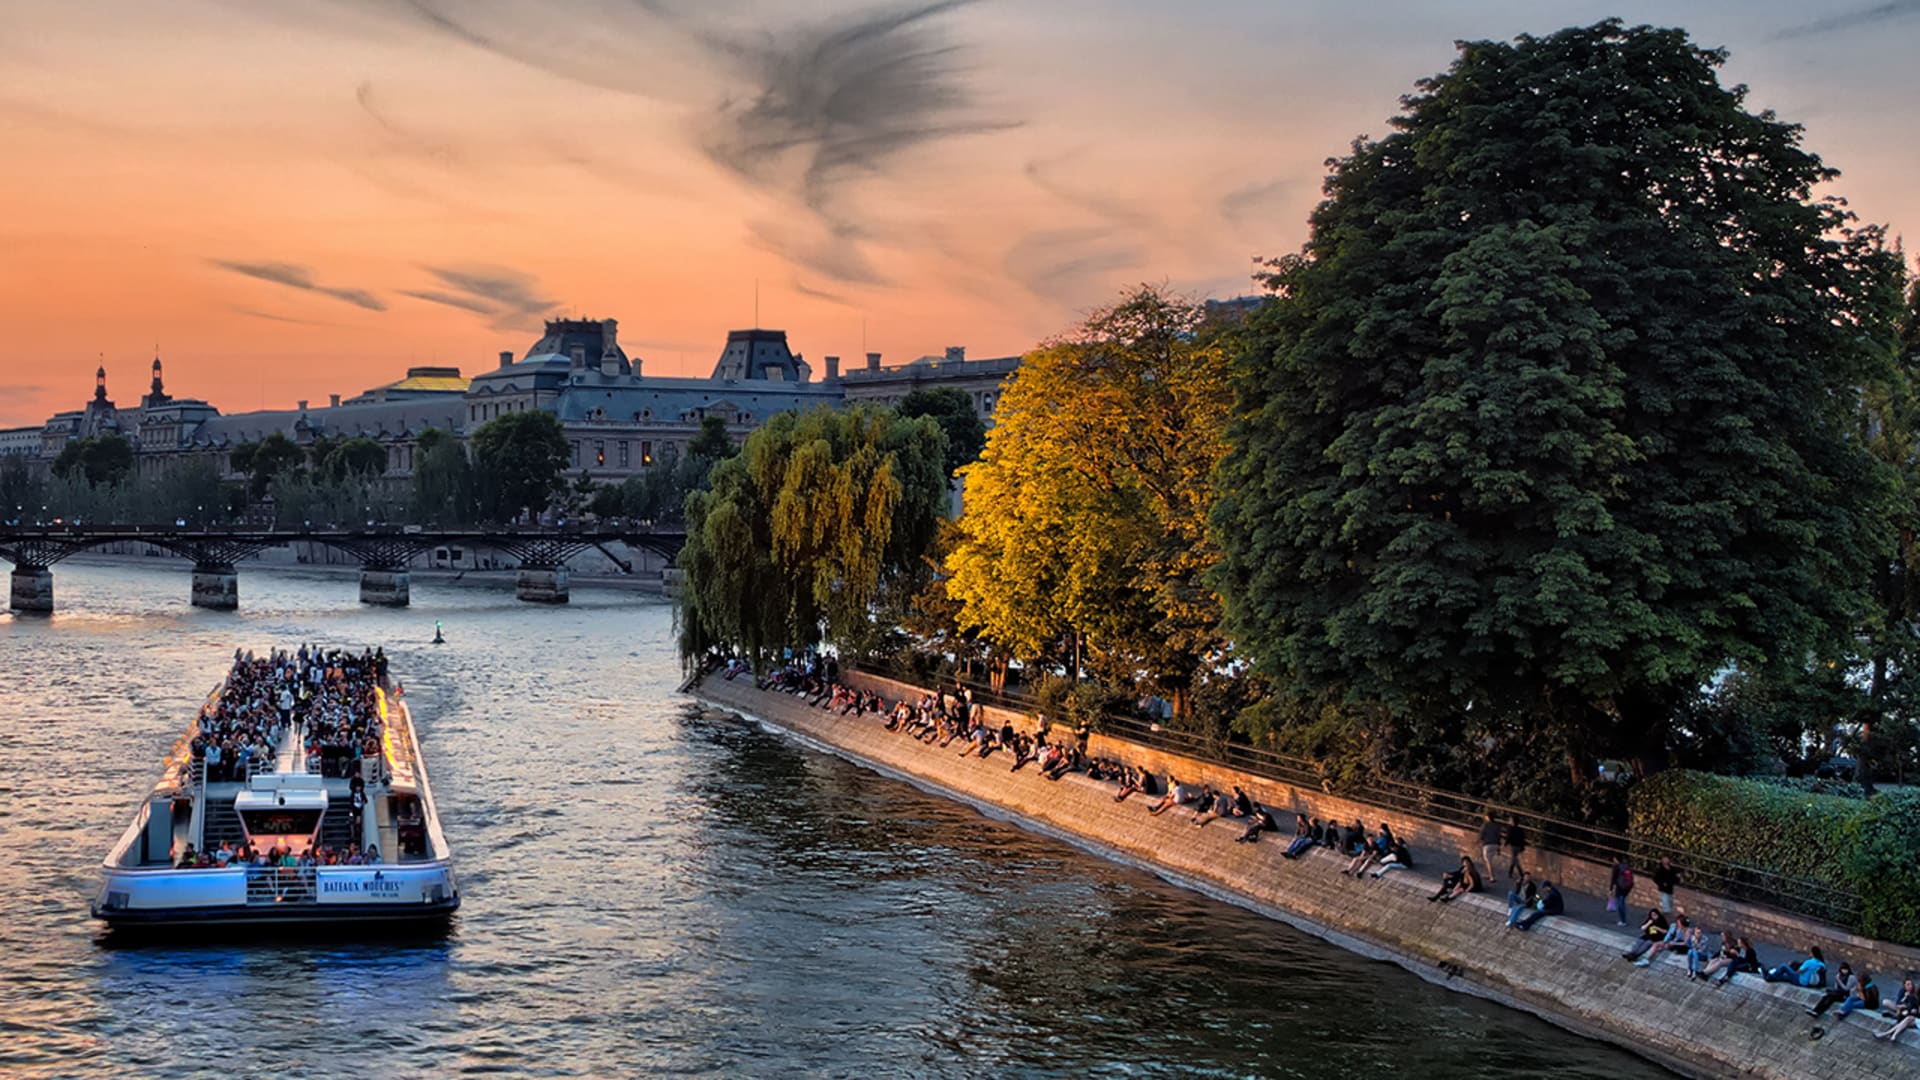 In Paris, the banks of the Seine will stay car-free